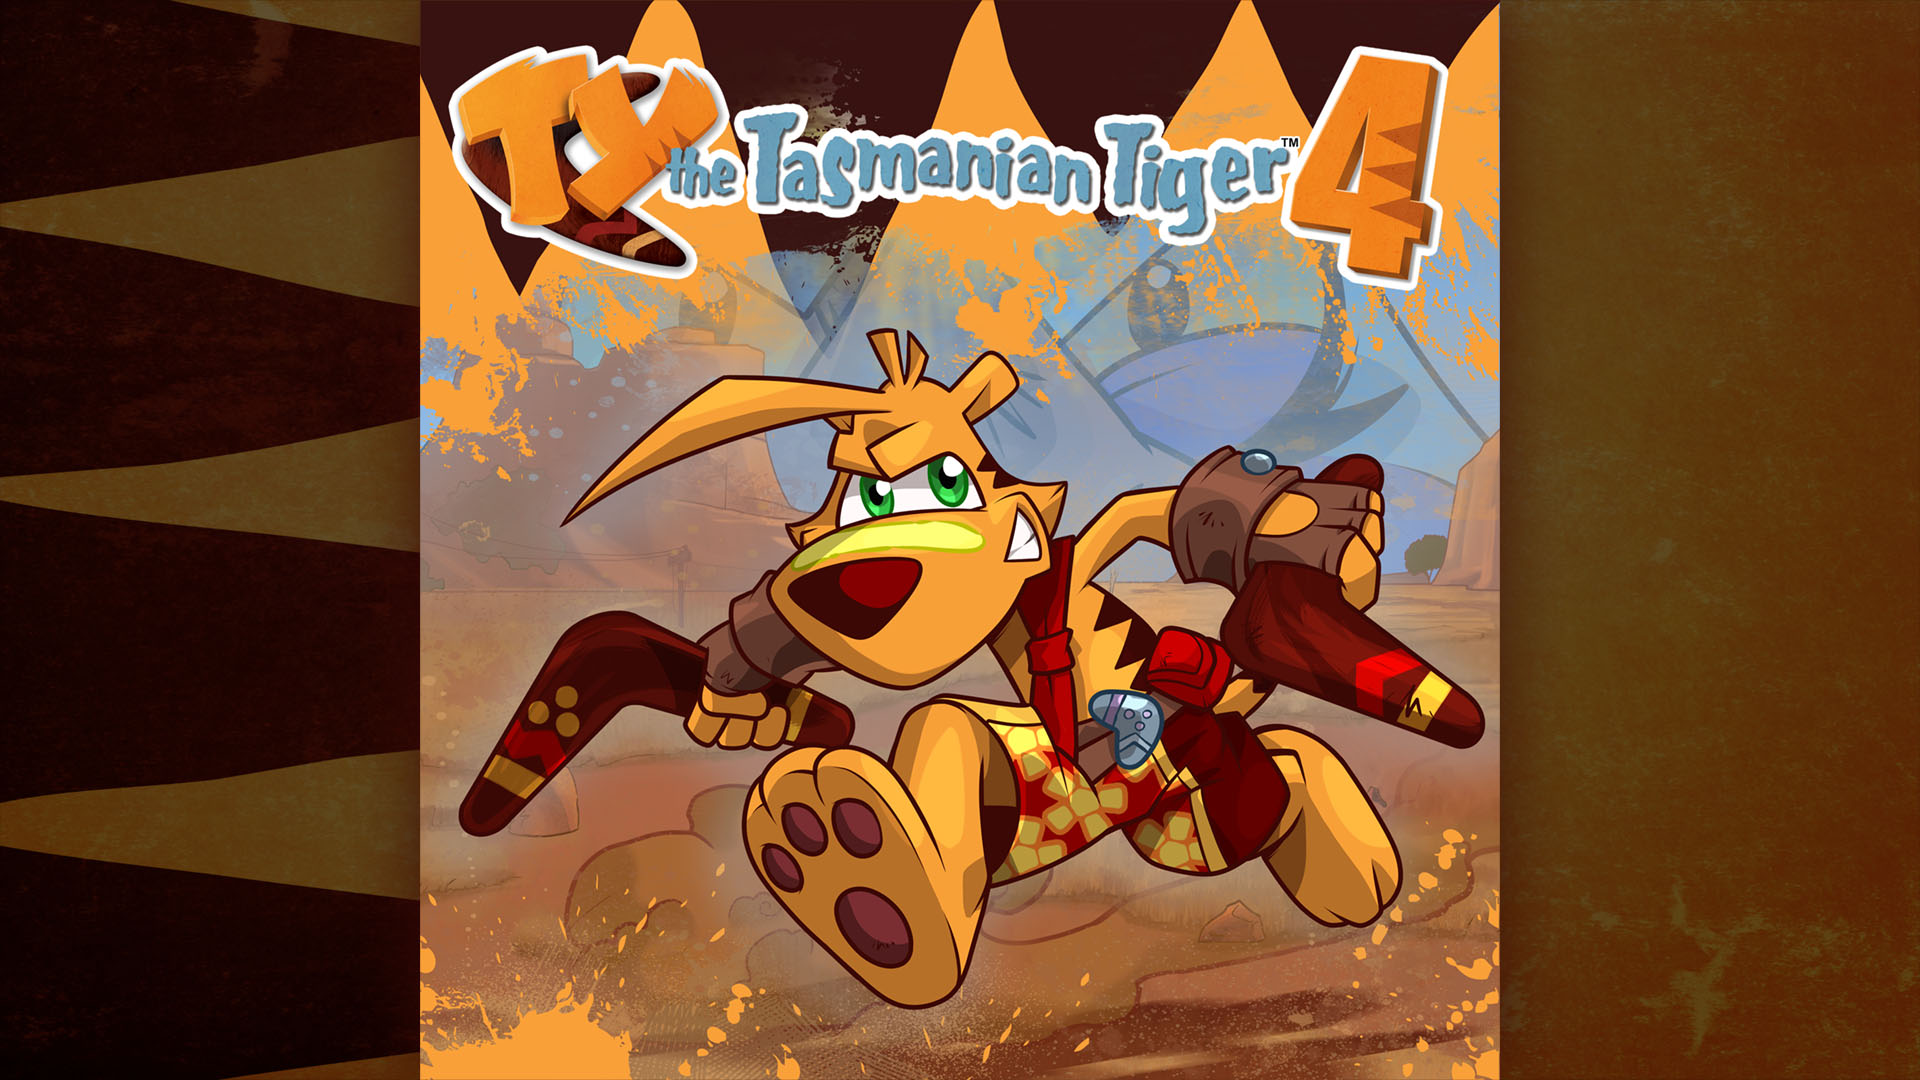 TY the Tasmanian Tiger 4 - The Soundtrack Collection screenshot